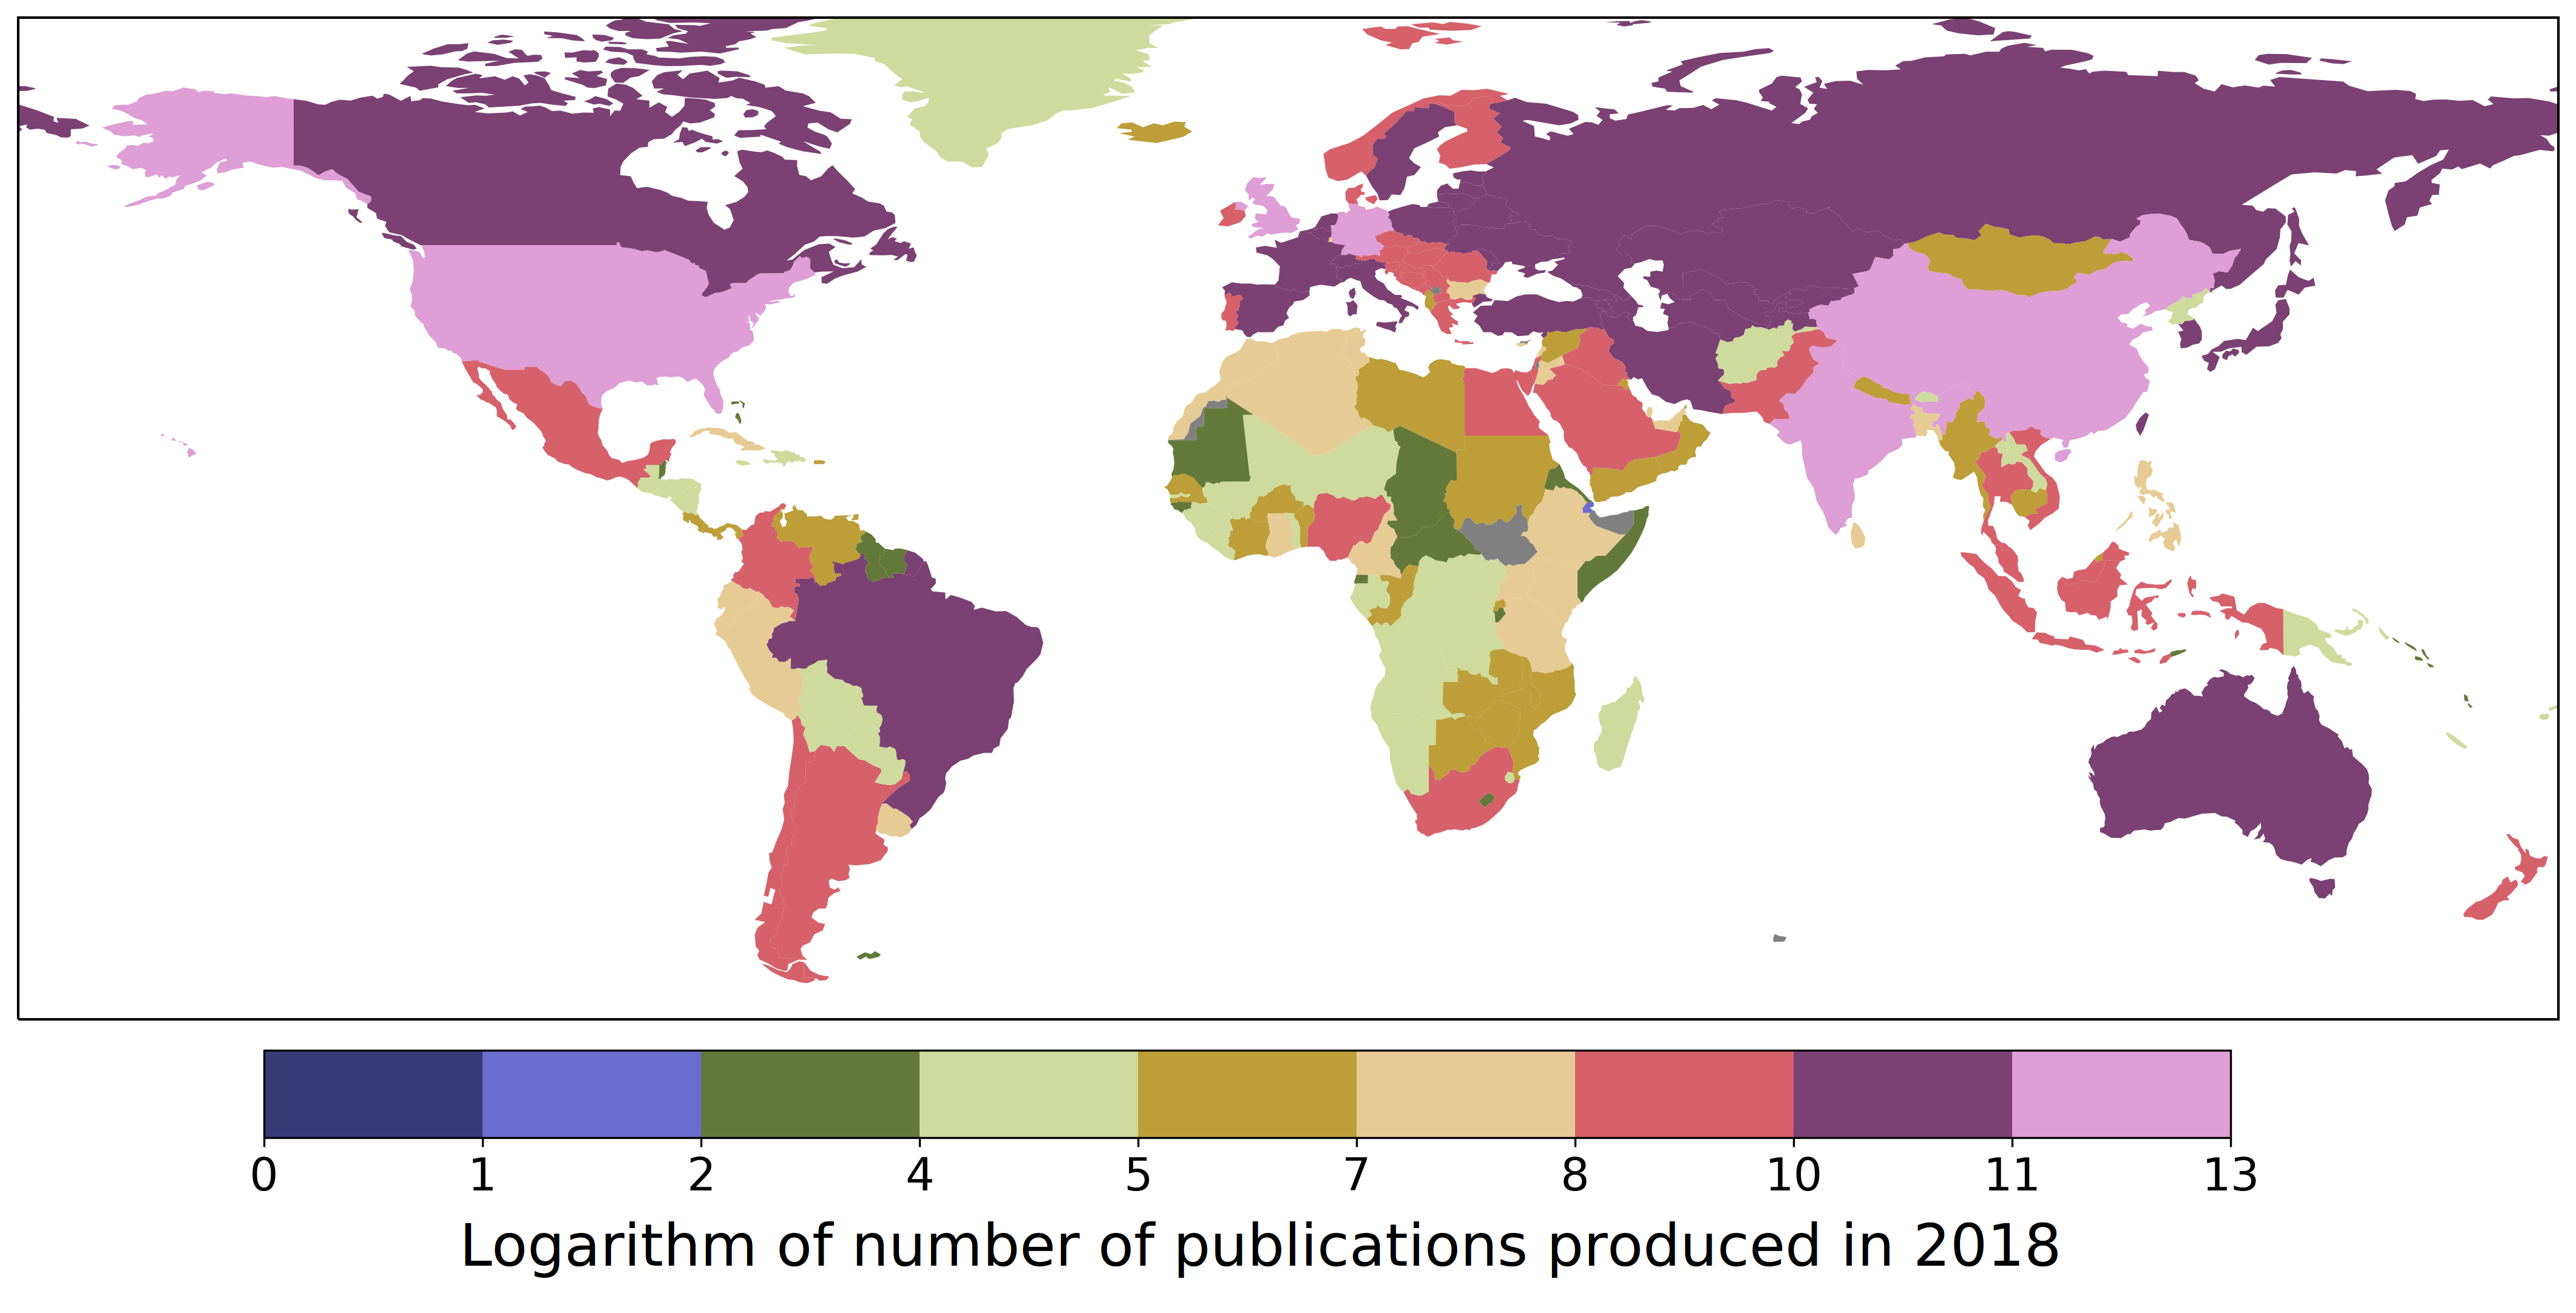 Logarithm of number of publications produced in 2018